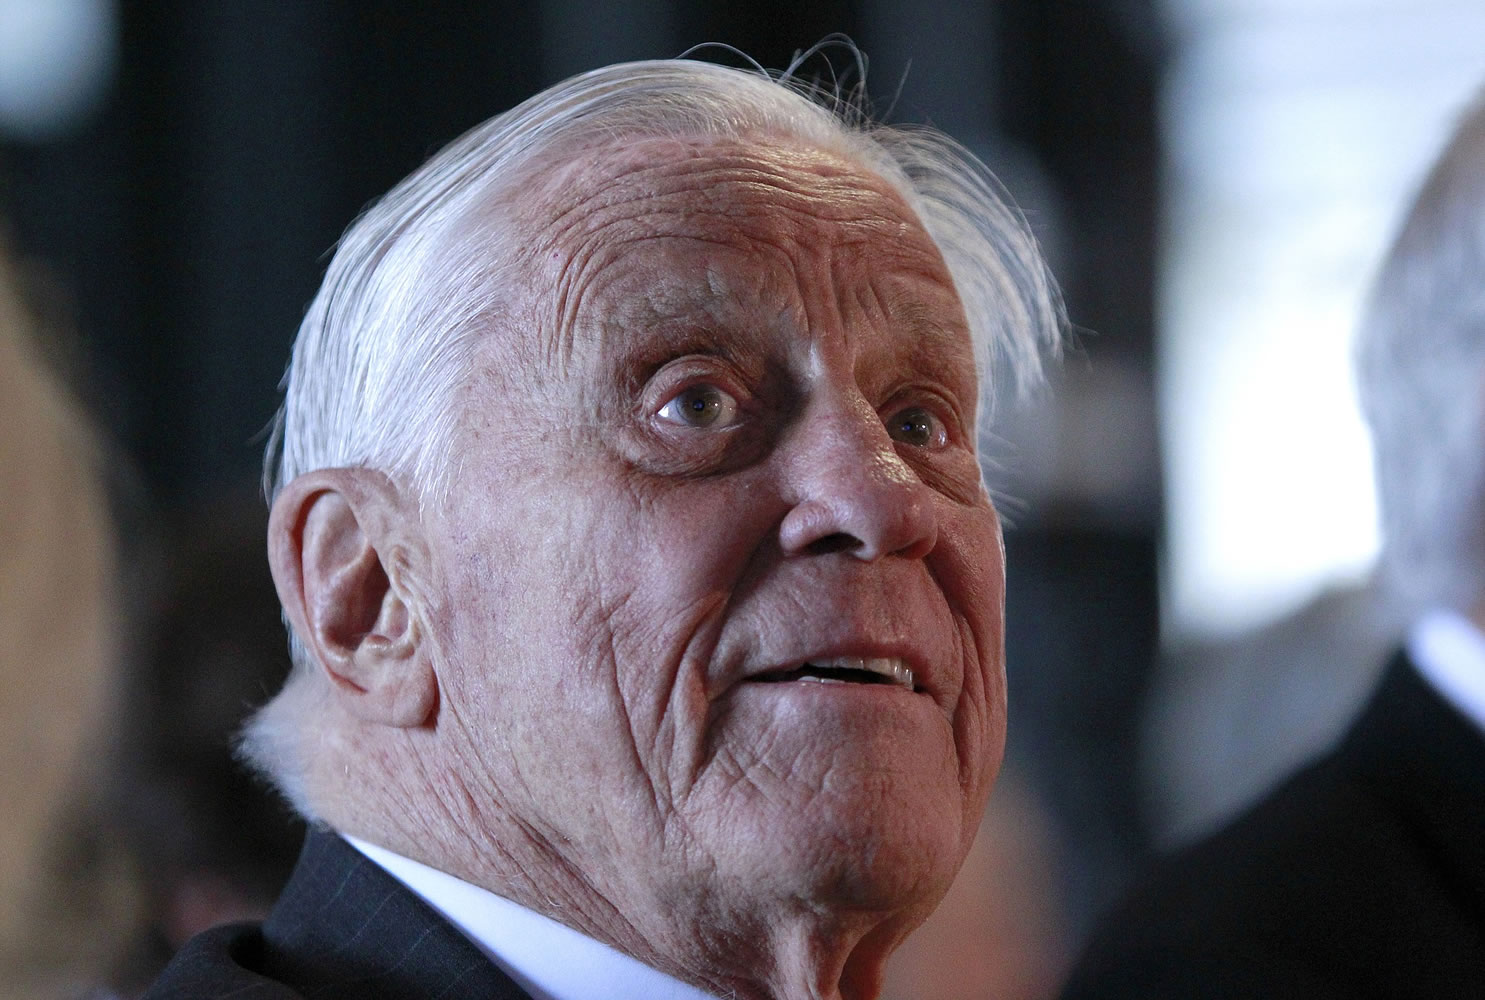 Ben Bradlee, former executive editor of The Washington Post, listens June 11, 2012 during an event sponsored by The Washington Post to commemorate the 40th anniversary of Watergate, at the Watergate office building in Washington. Bradlee died Tuesday, according to the Washington Post.